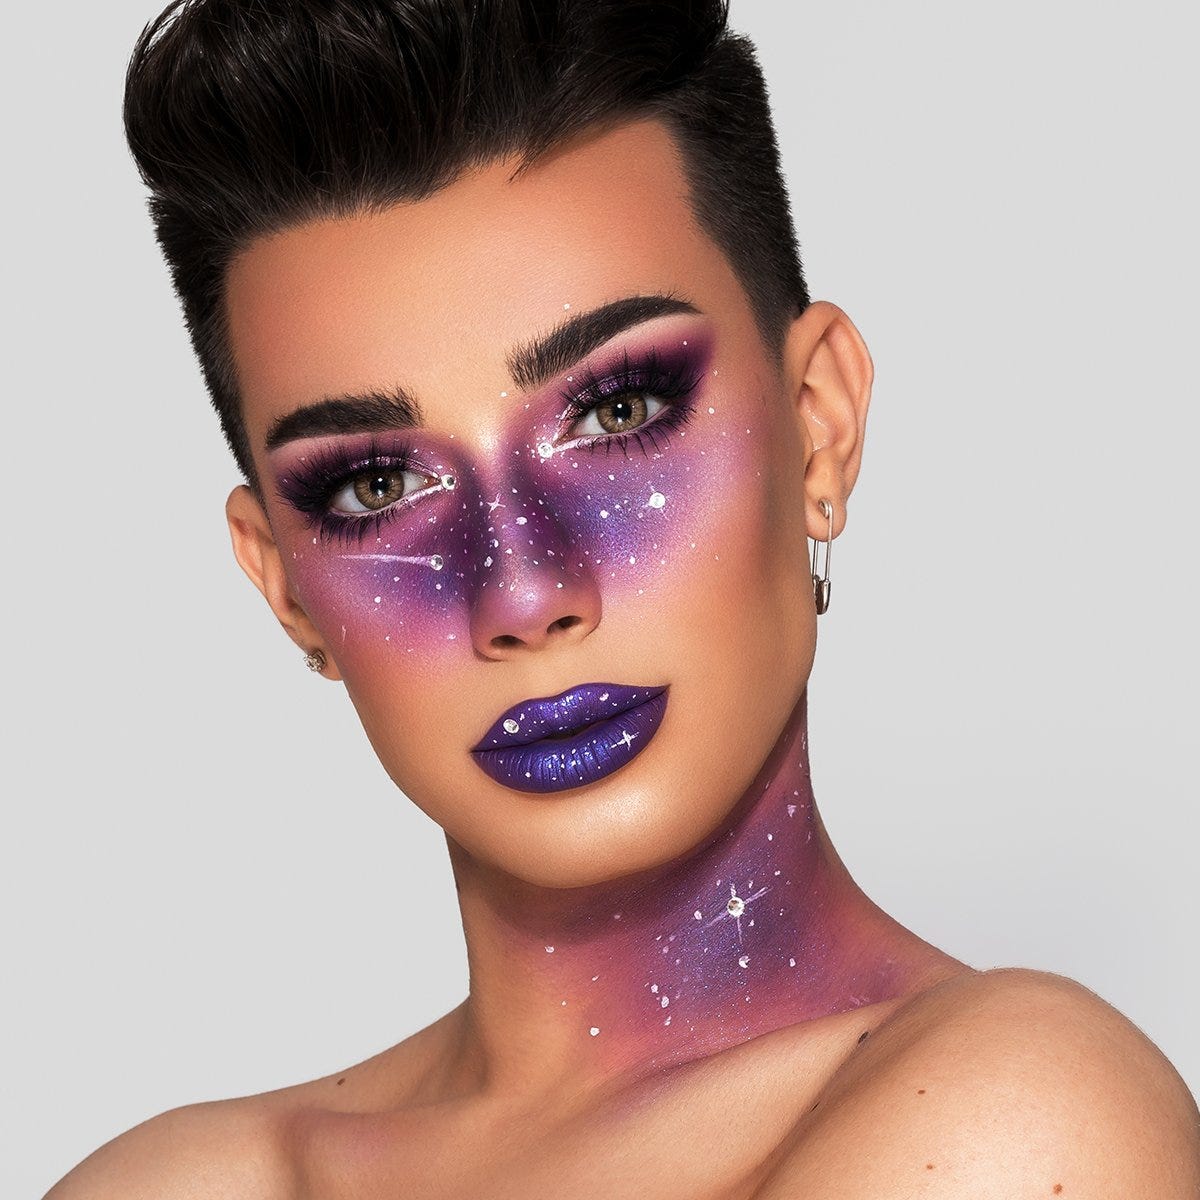 Was James Charles' Palette Reveal Too Much? | by Sav | Medium